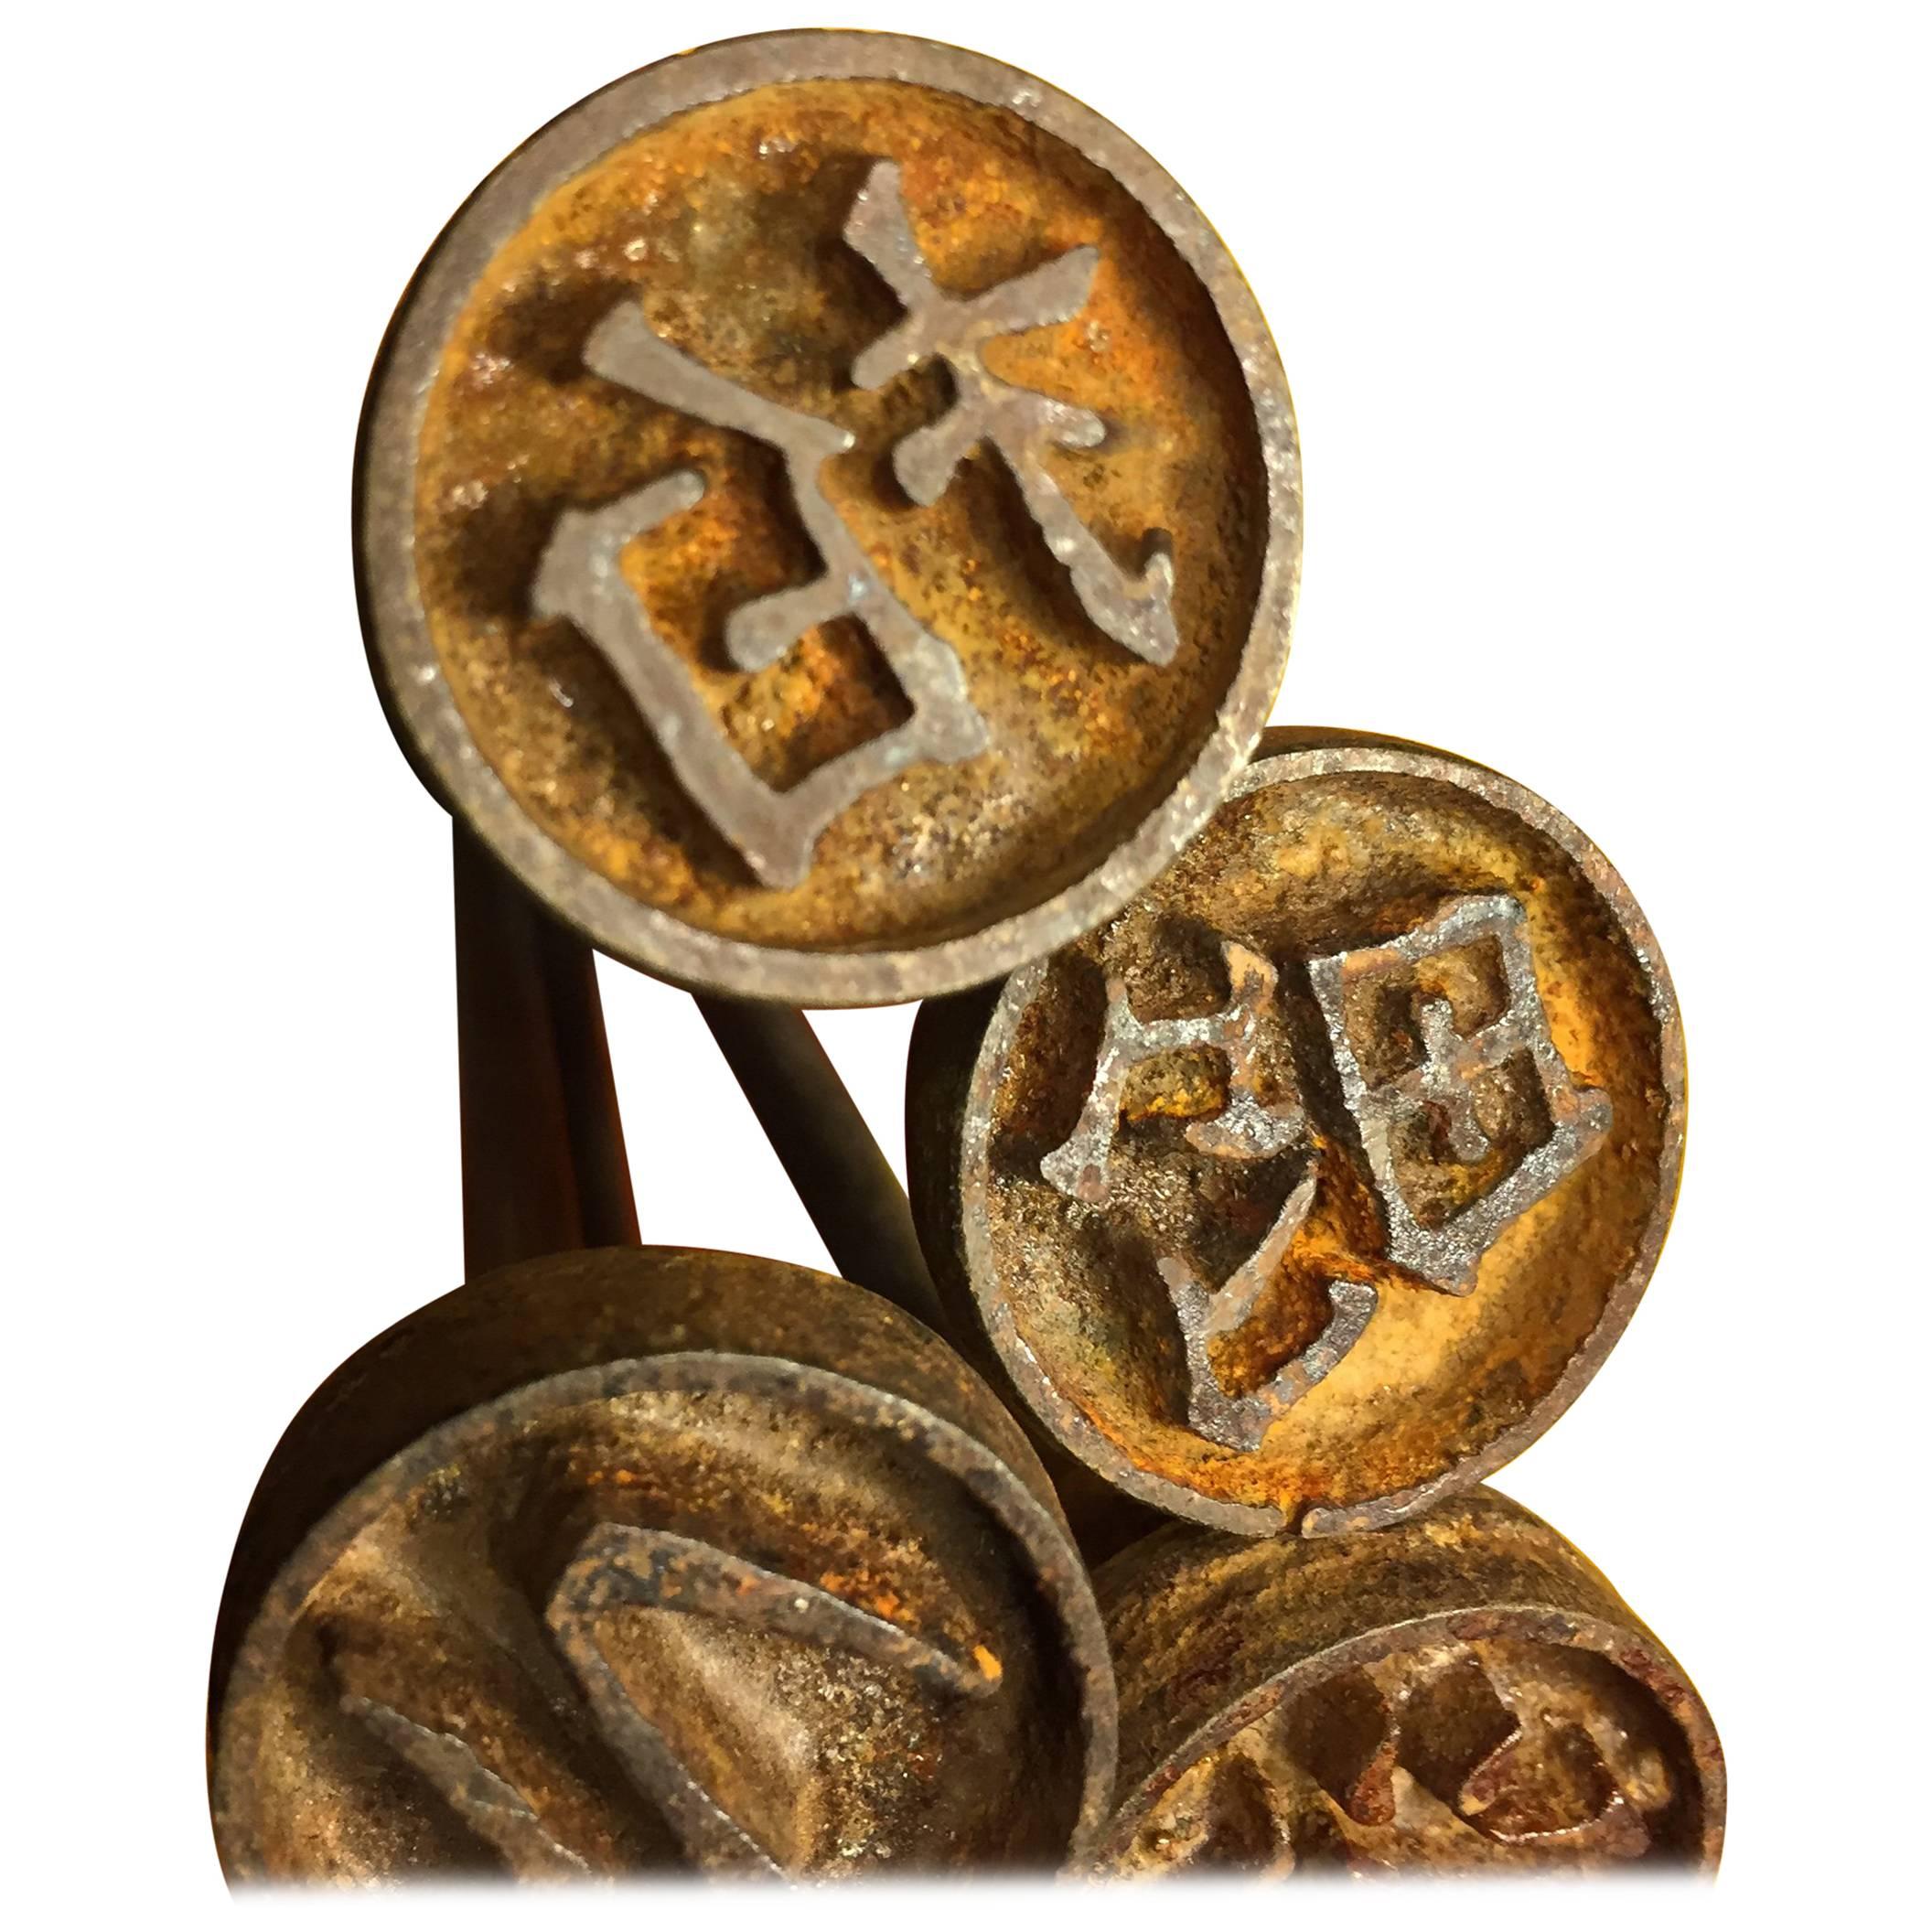 Japan an unusual antique hand-wrought iron metal stamps collection of five (5) 19th century stamps Hanko used to mark and burn their individual design into wooden objects such as boxes. 

Seldom available. We acquired our group recently from a Kyoto